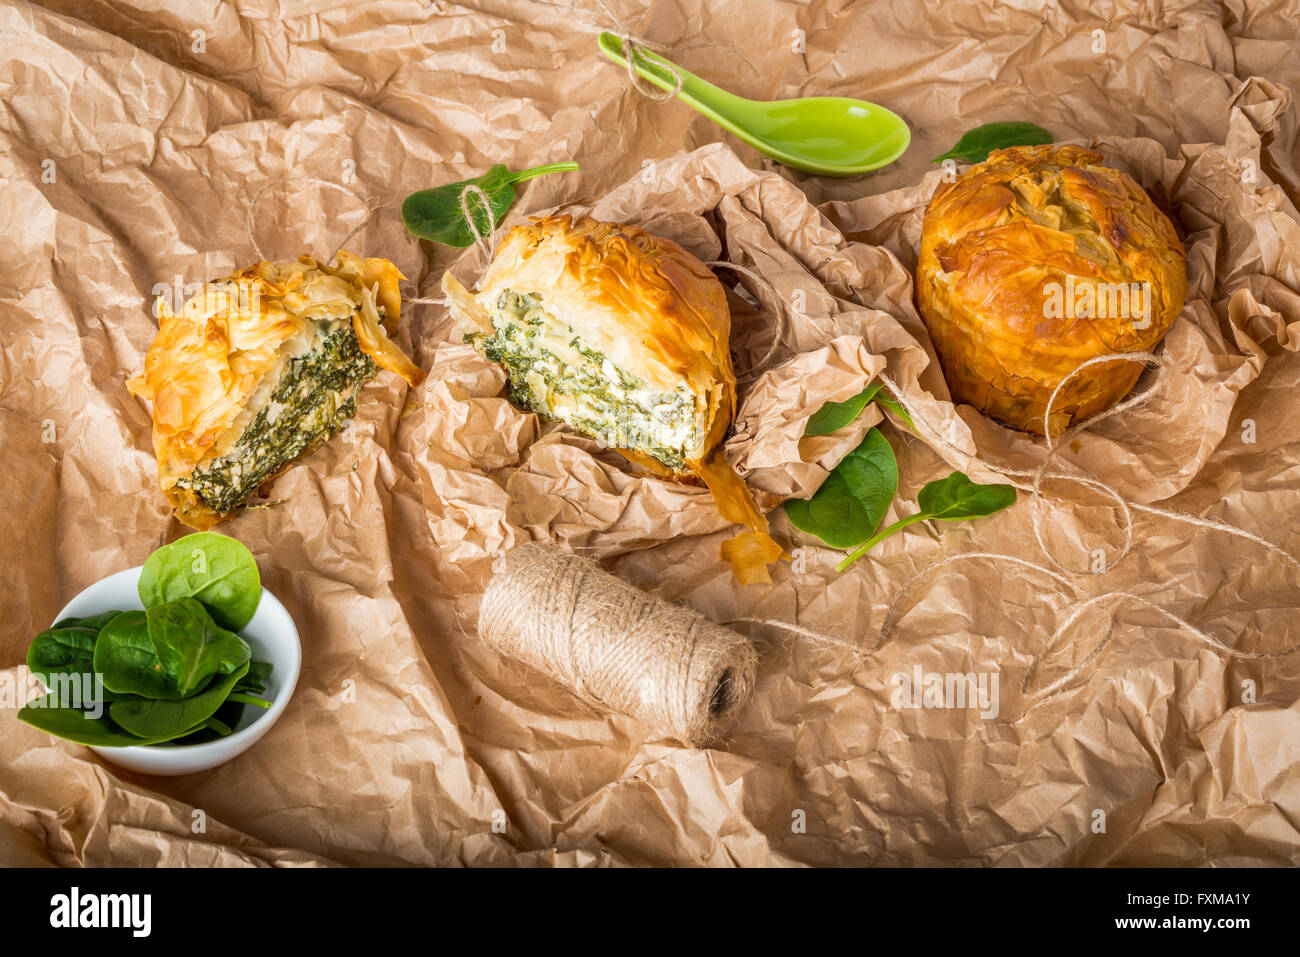 Spanakopita - sliced Greek spinach pie with feta and ricotta, street food on wrapping paper Stock Photo